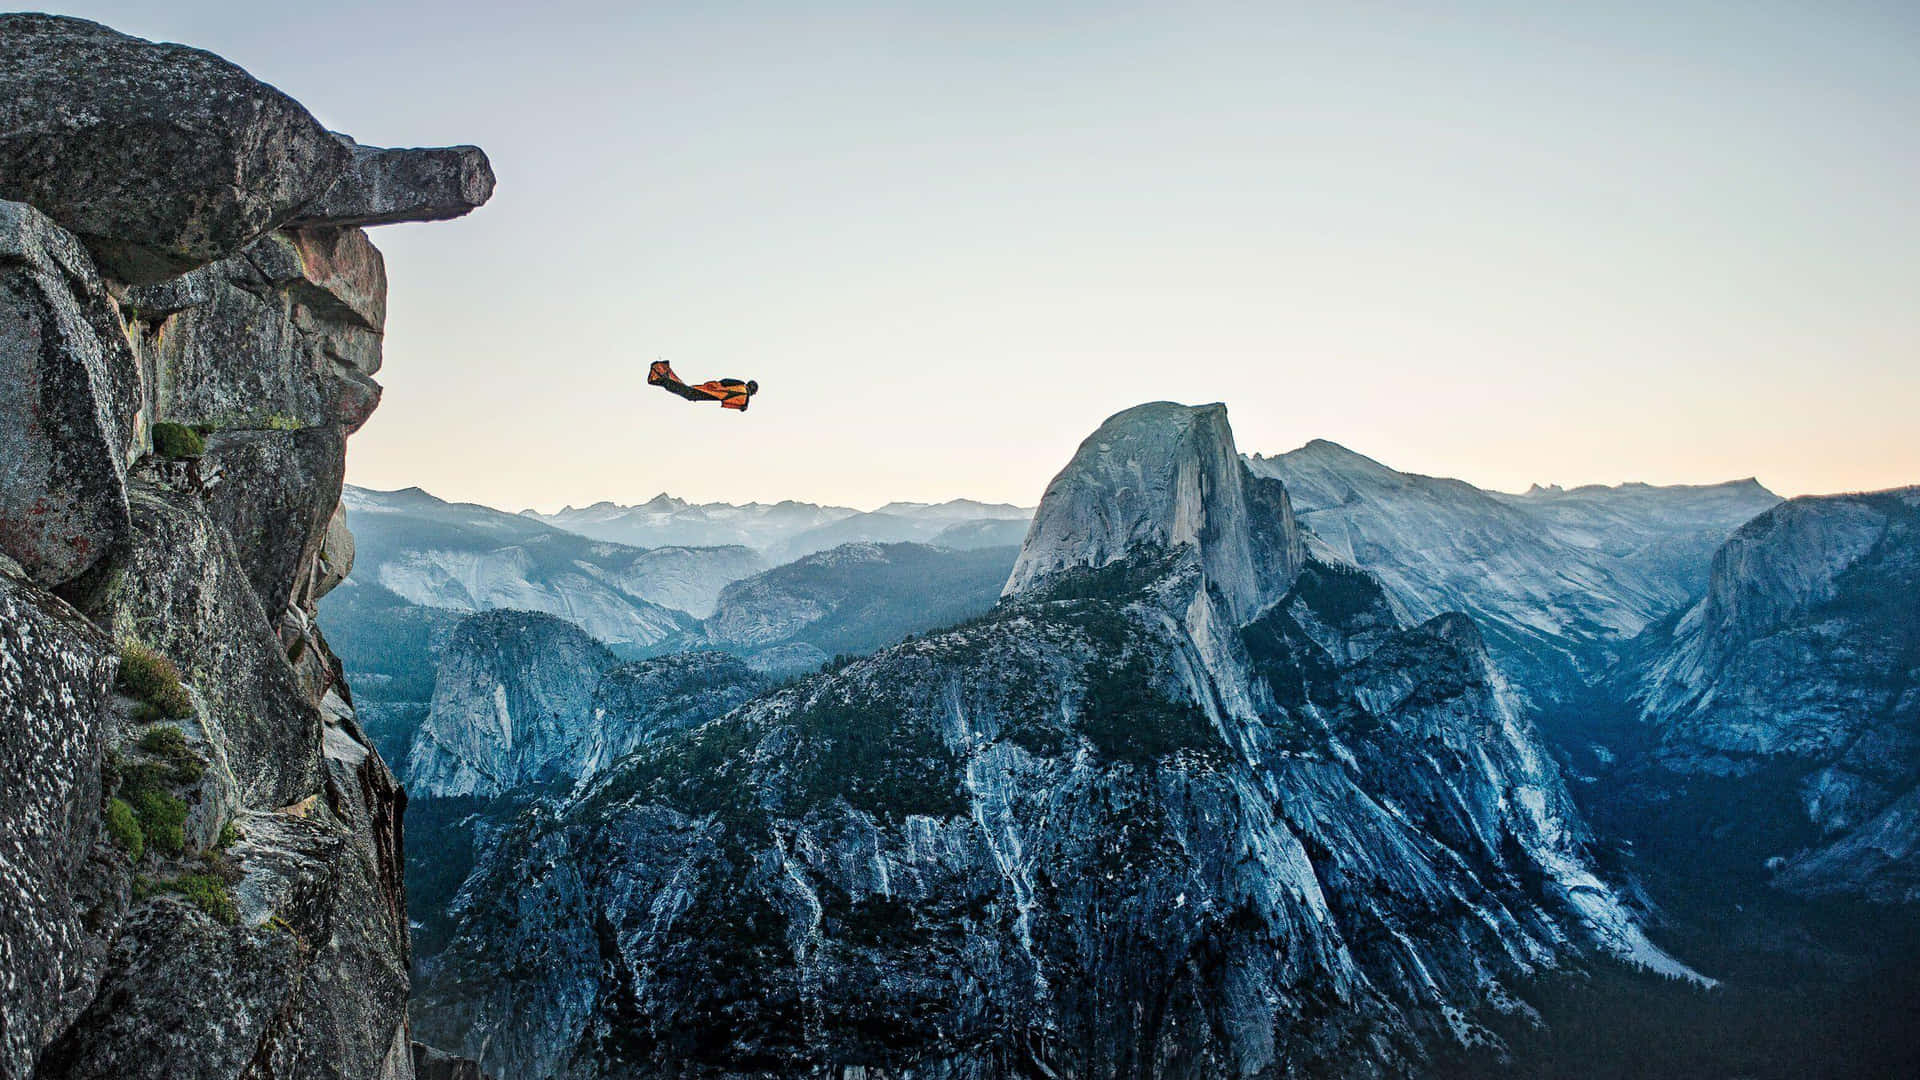 A Man Is Jumping Off A Cliff In Yosemite